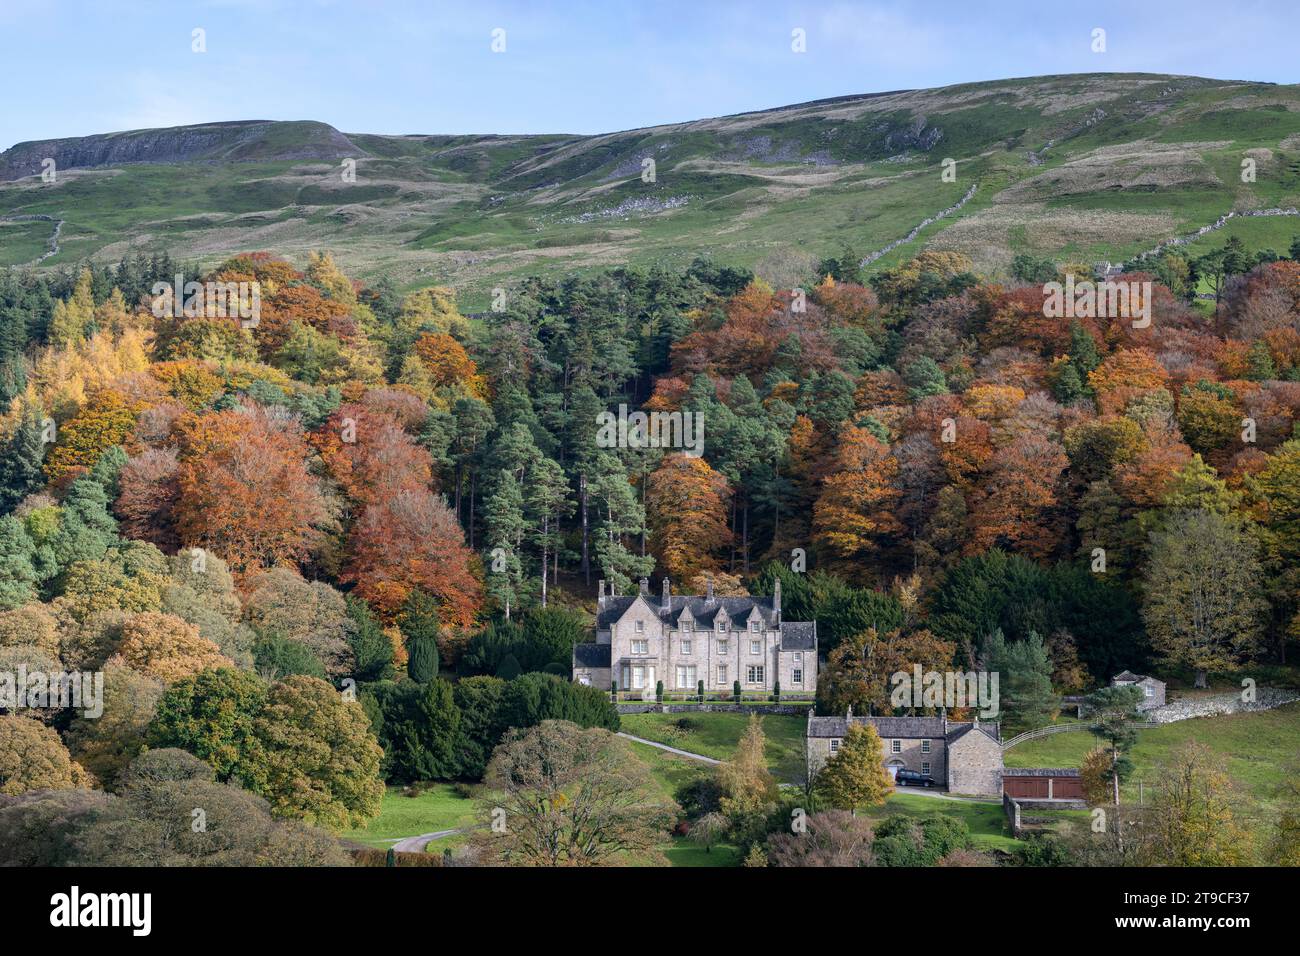 Scar House in Arkengarthdale under Langthwaite Scar, now owned by the Duke of Norfolk. Yorkshire Dales National Park, UK. Stock Photo